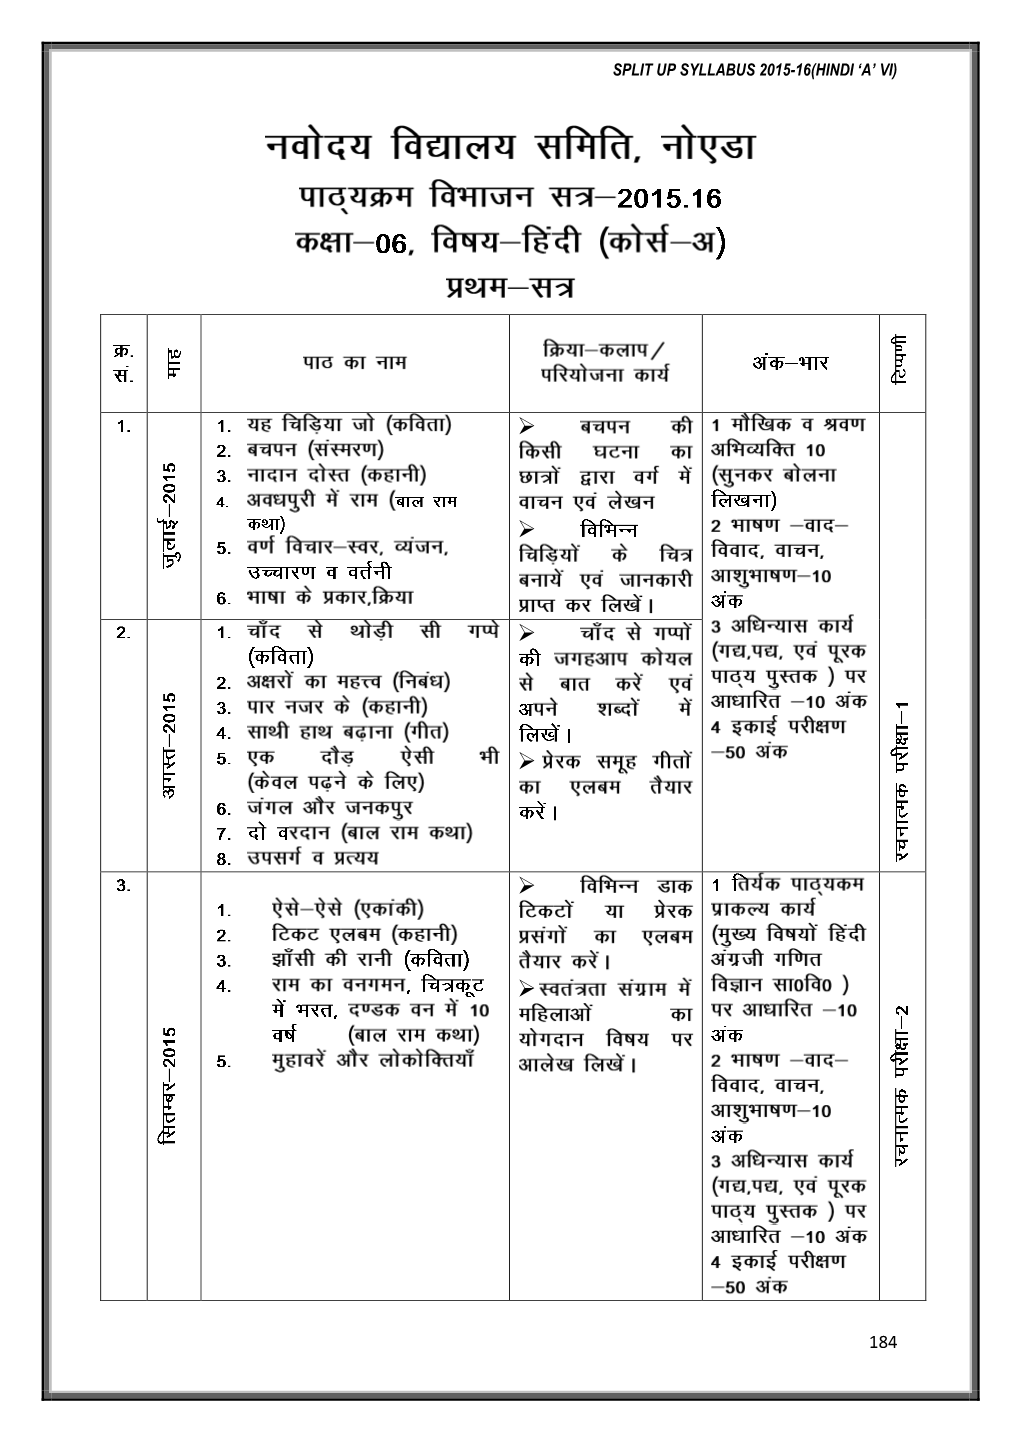 Split up Syllabus of All Classes for the Year 2015-16